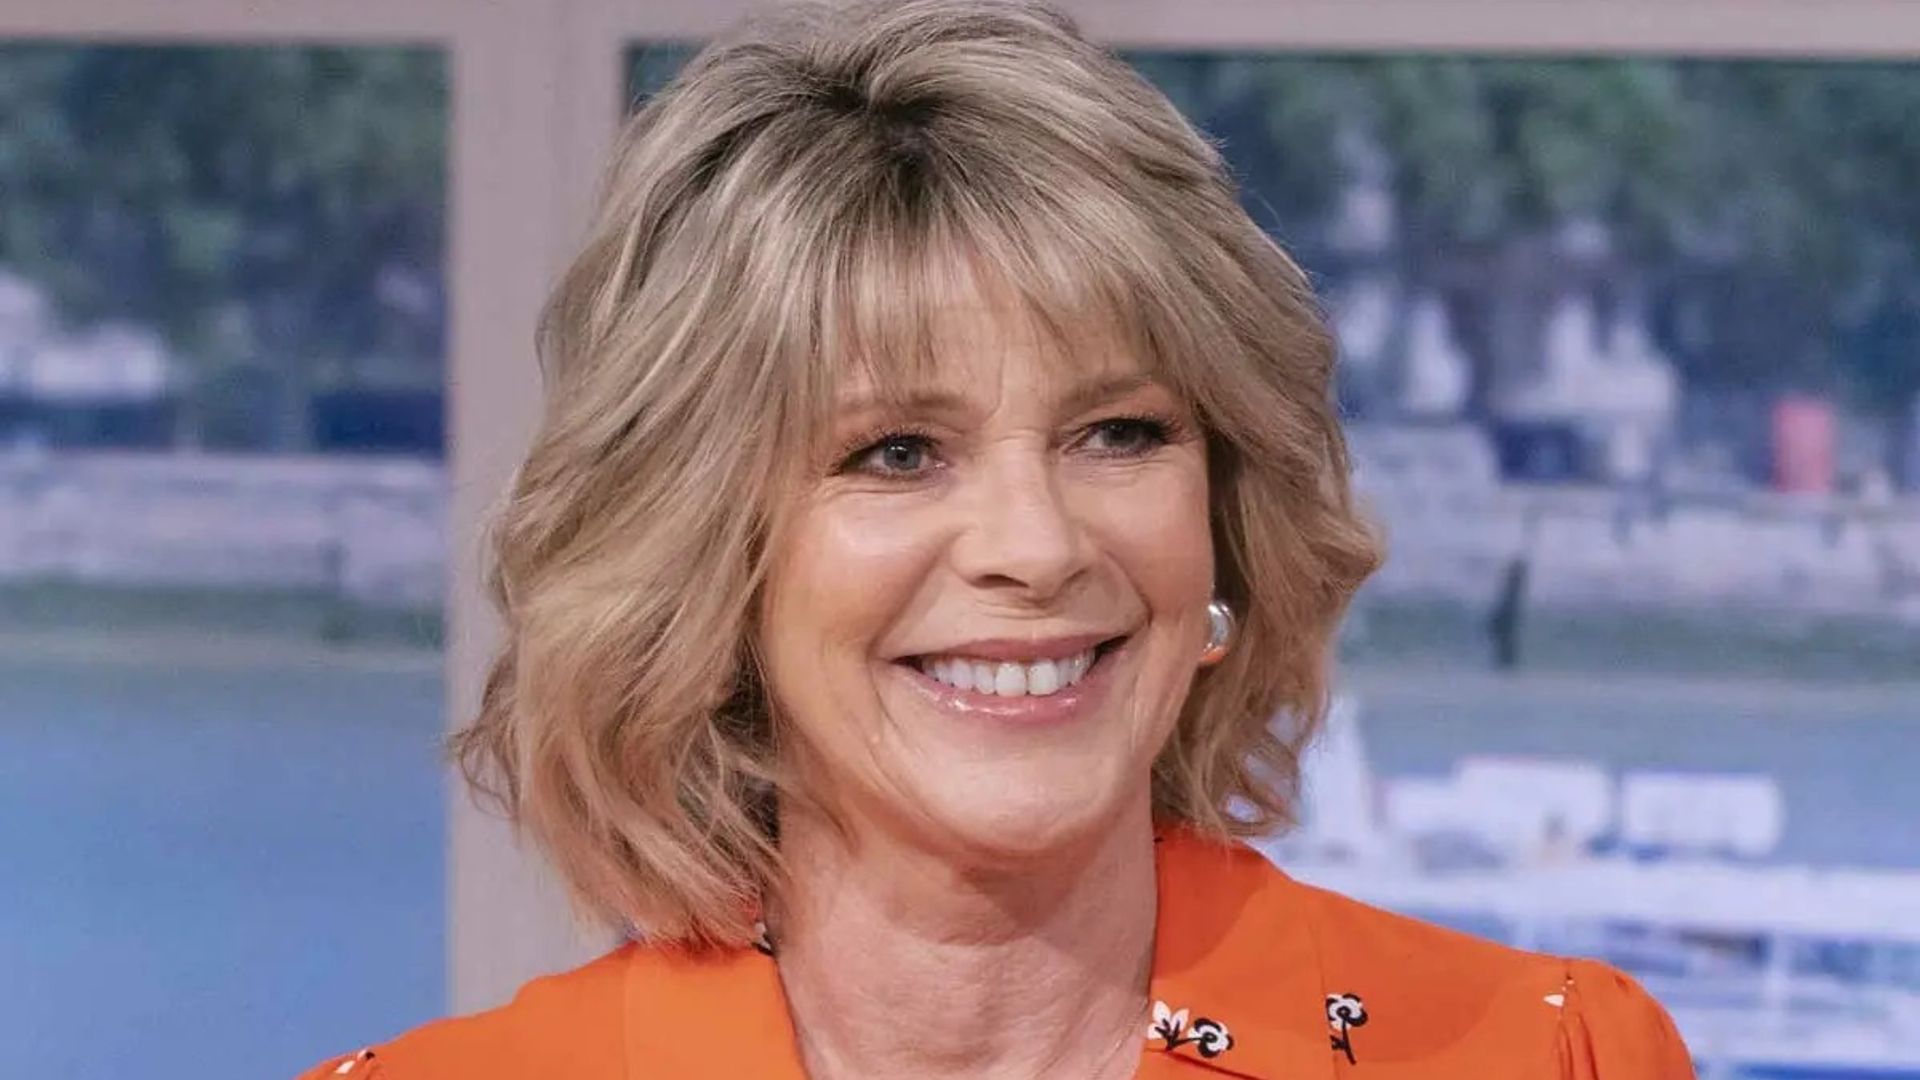 Ruth Langsford's bold M&S knit costs just £15 - and it goes perfectly with her modern new hairstyle